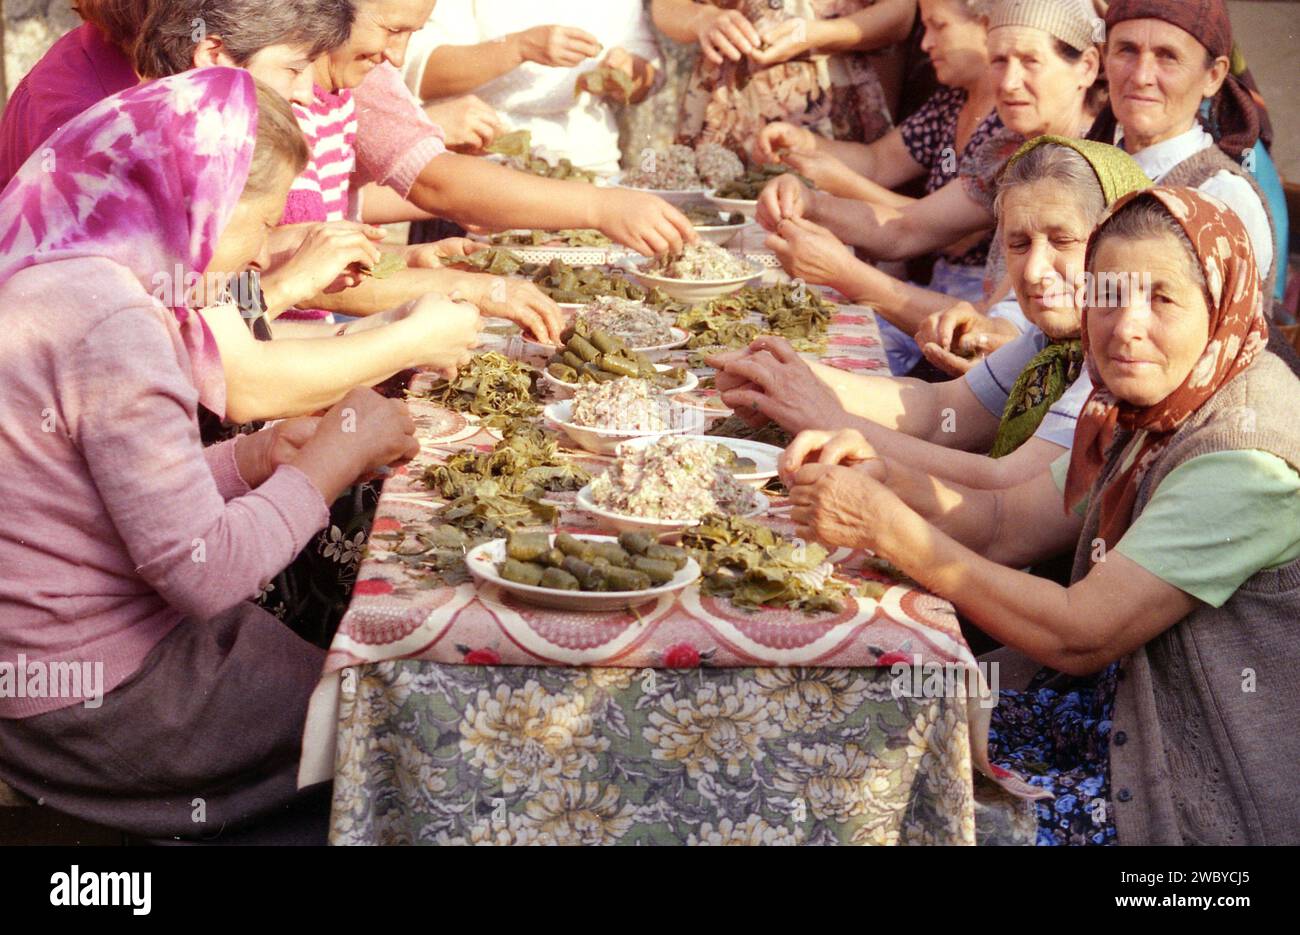 Vrancea County, Romania, approx. 1998. A group of local women preparing the traditional grape leaves rolls for an event. Stock Photo